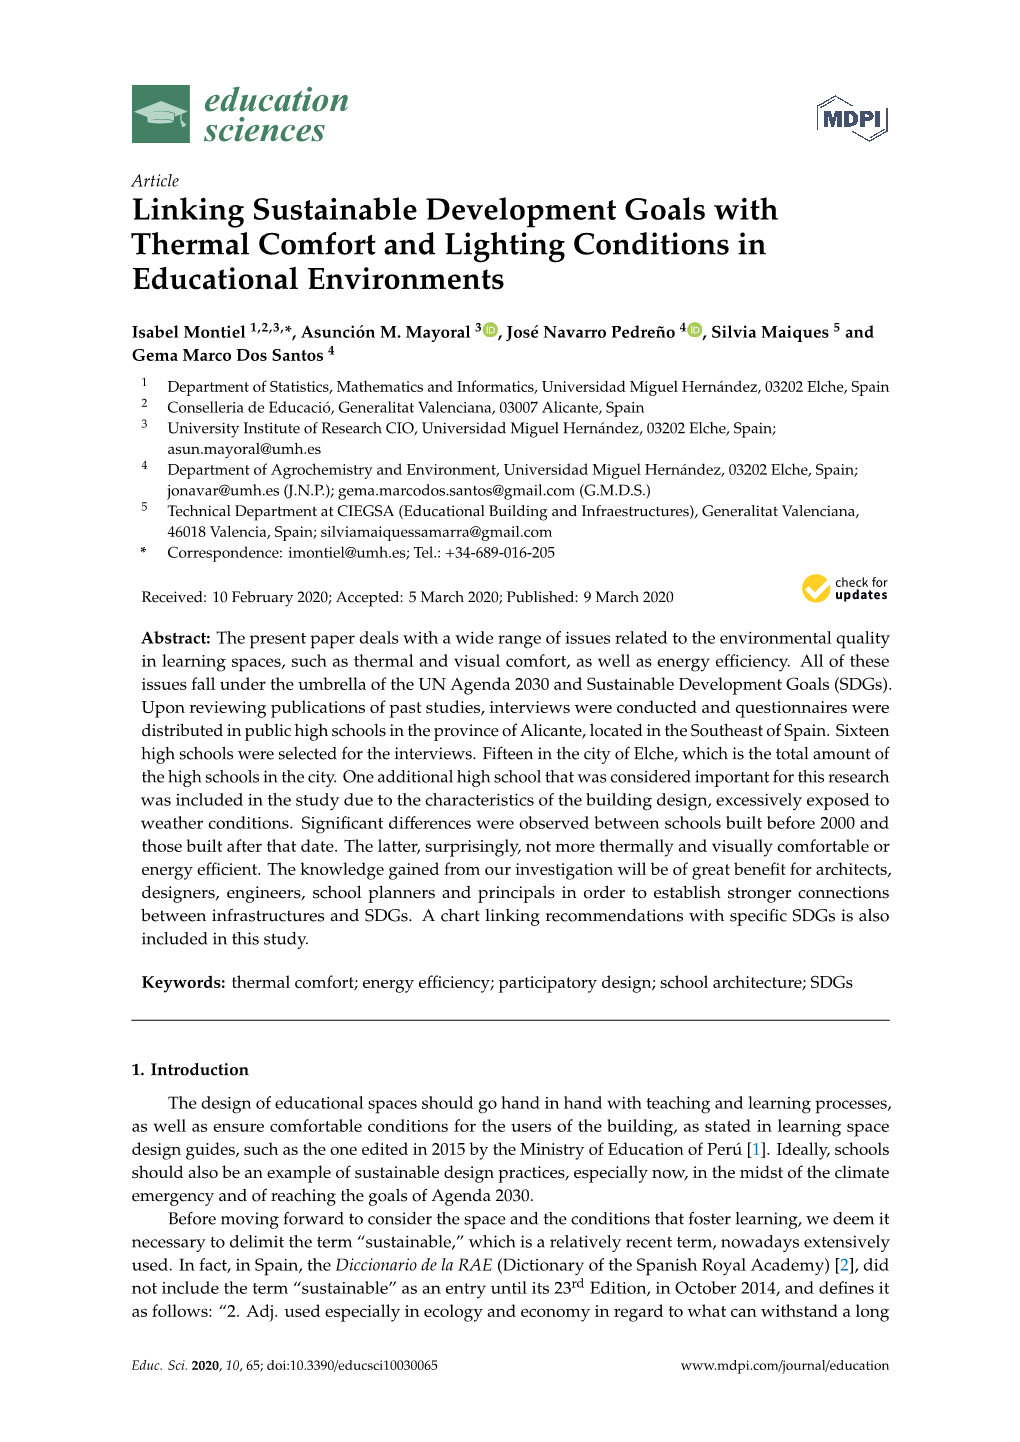 Linking Sustainable Development Goals with Thermal Comfort and Lighting Conditions in Educational Environments